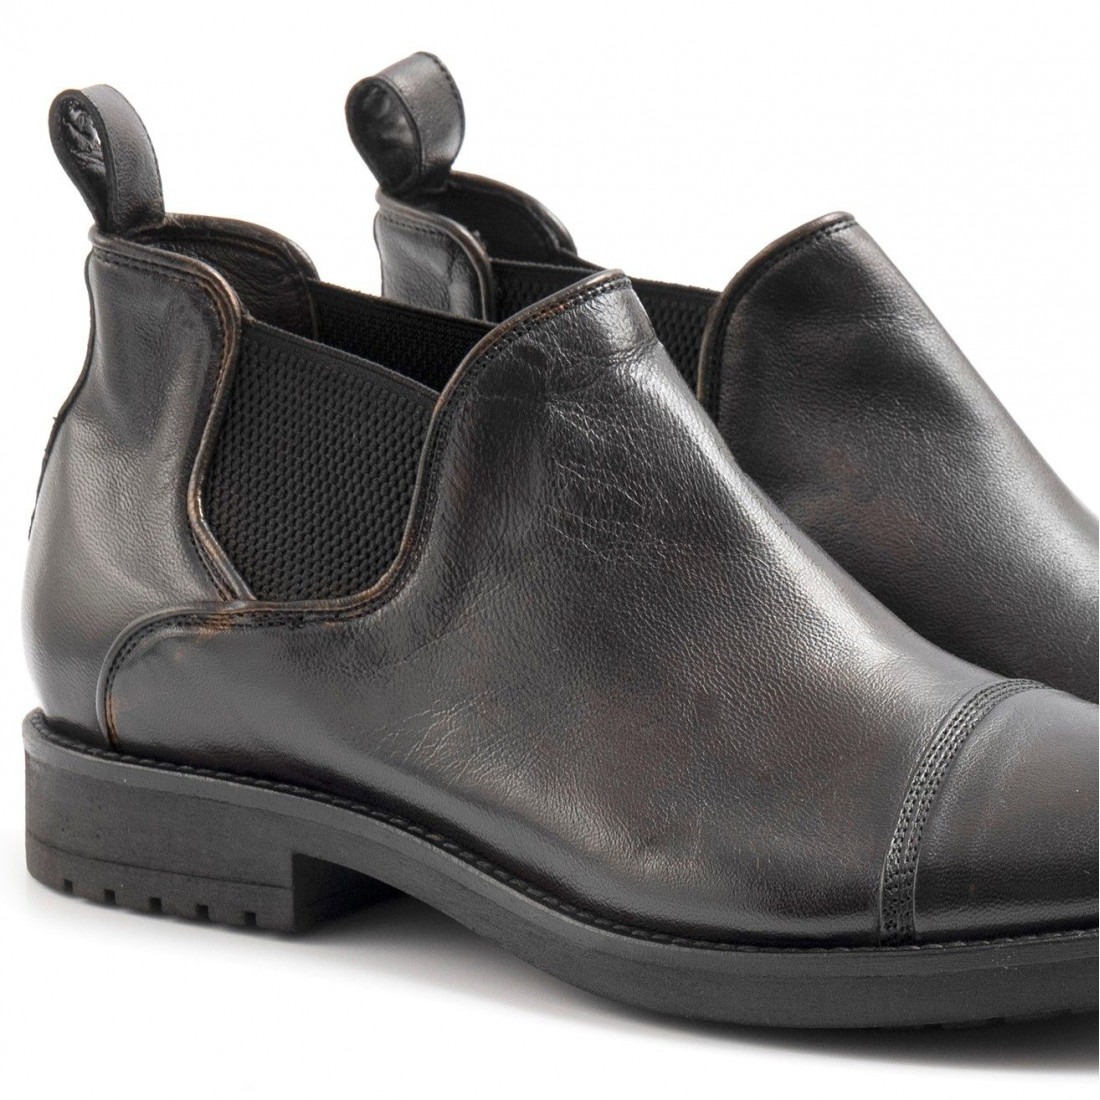 Men's JP David ankle boots in brown soft leather